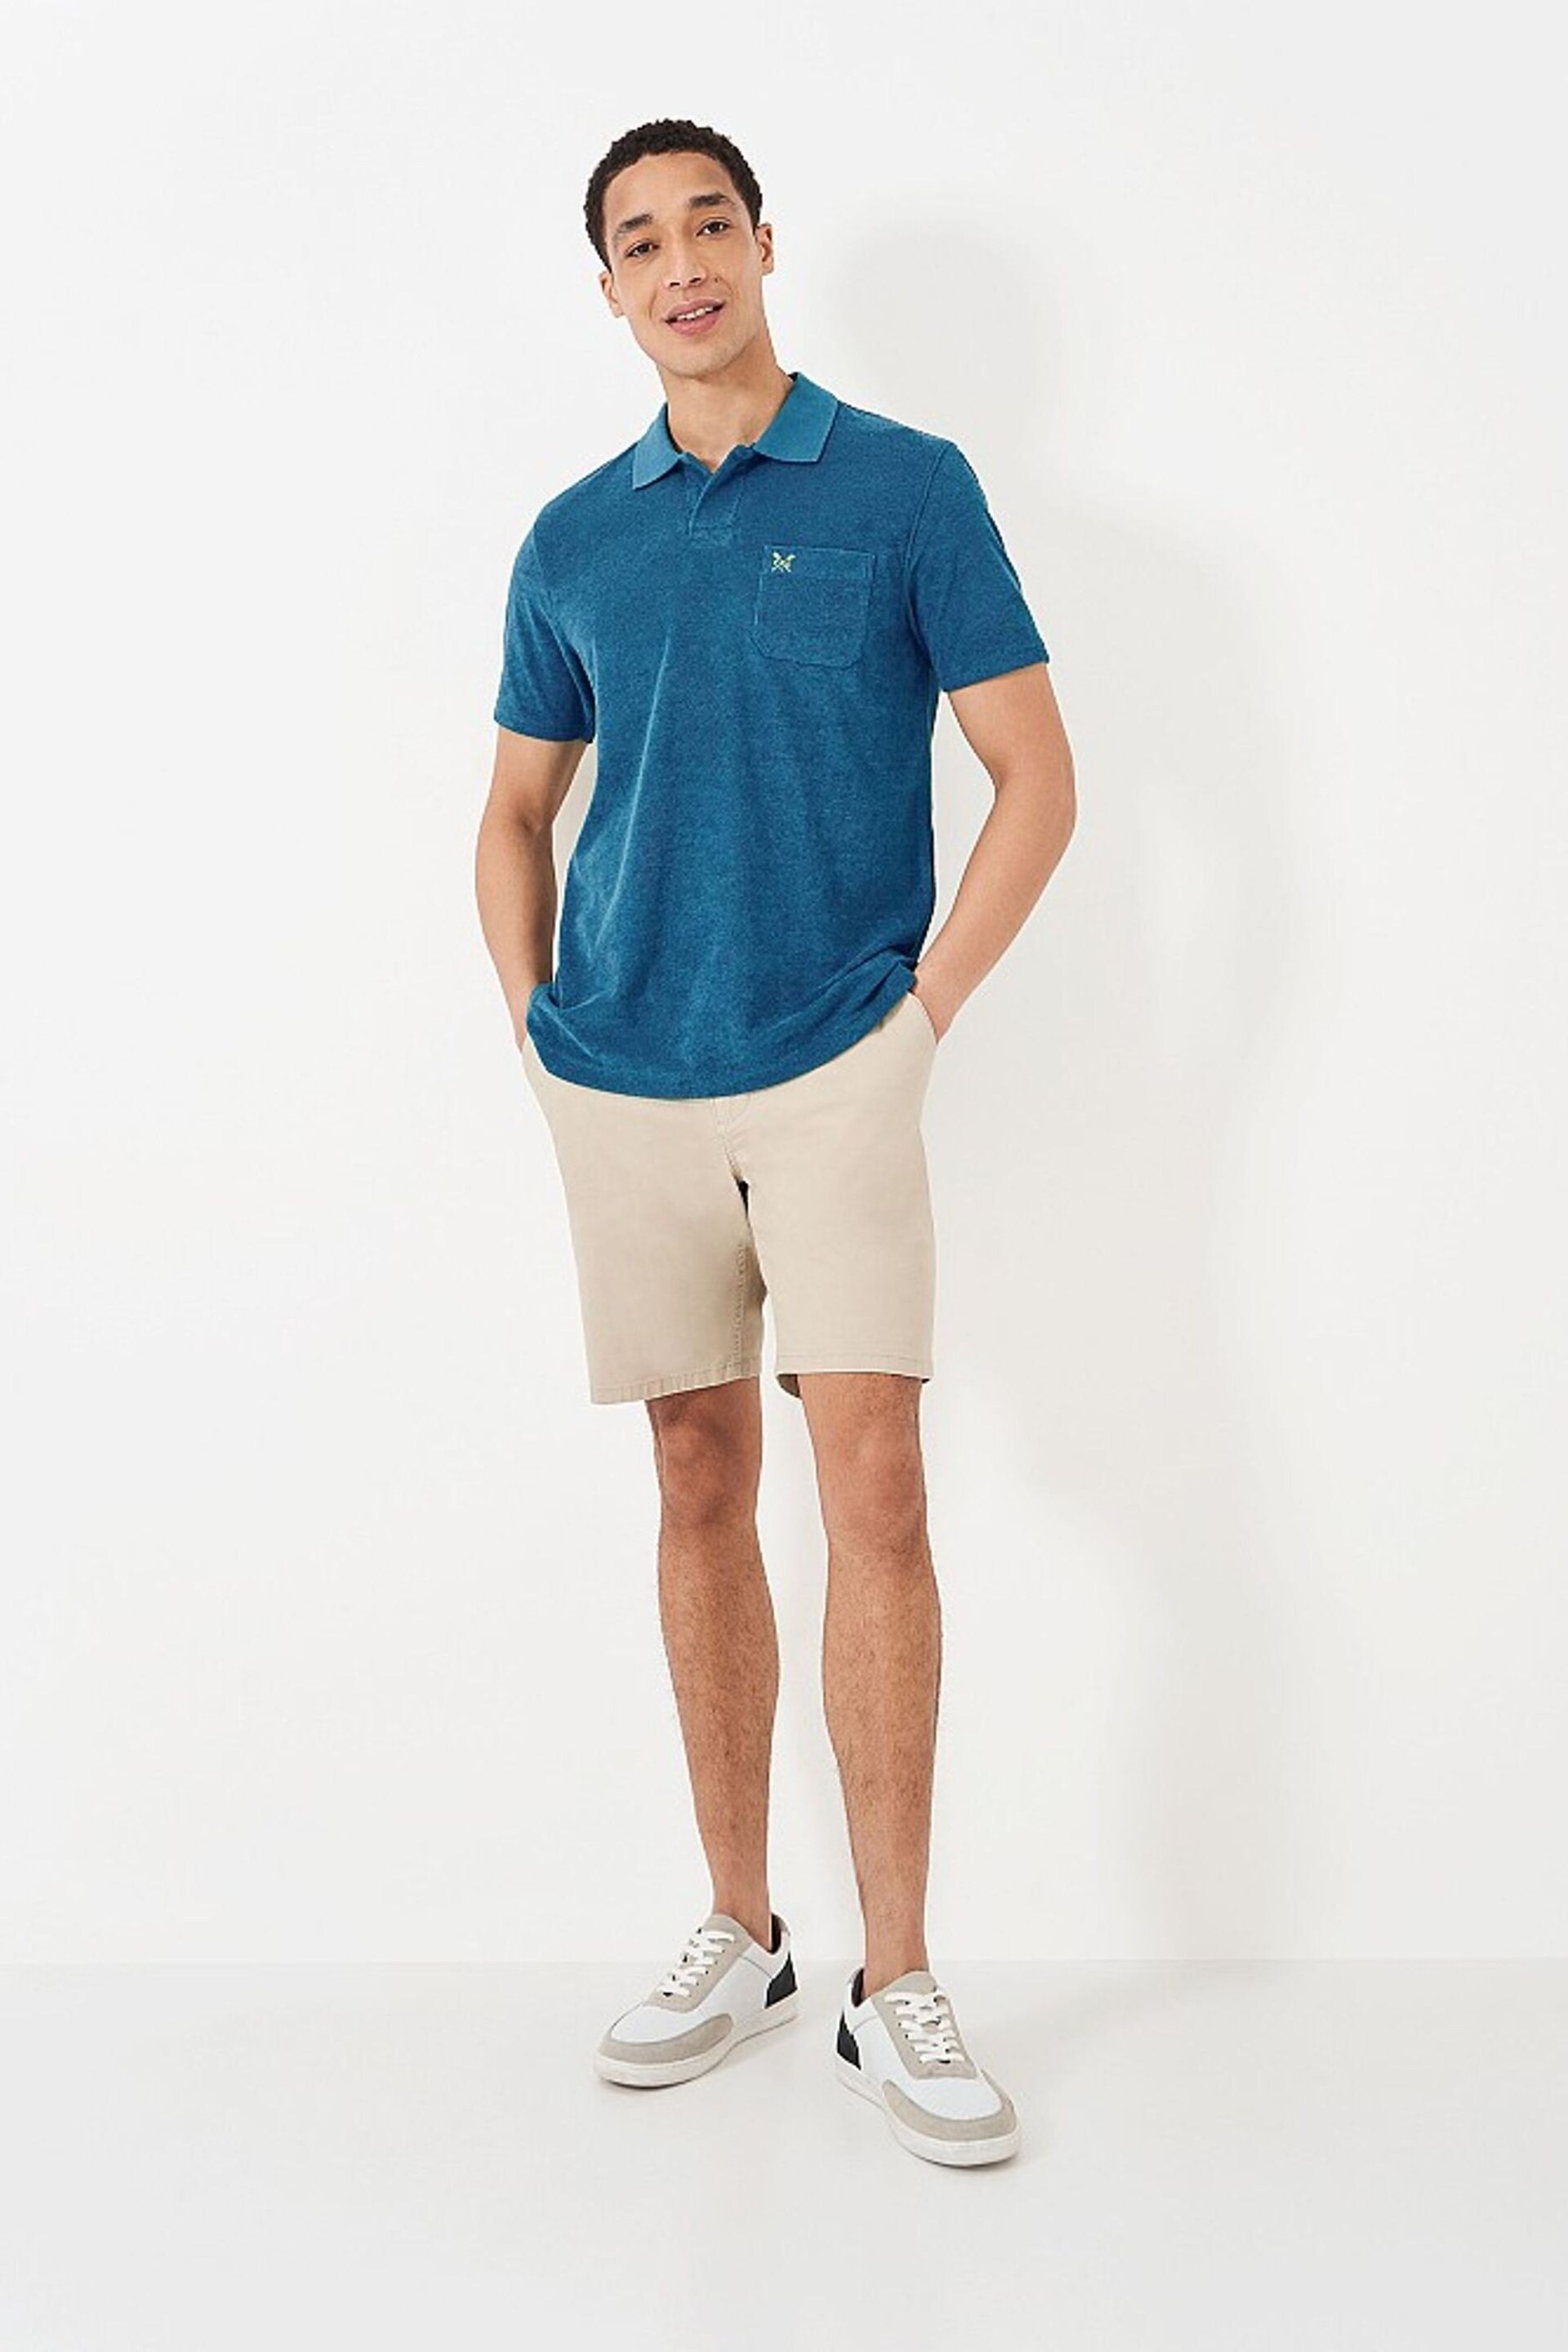 Crew Clothing Towelling Polo Shirt - Image 1 of 4